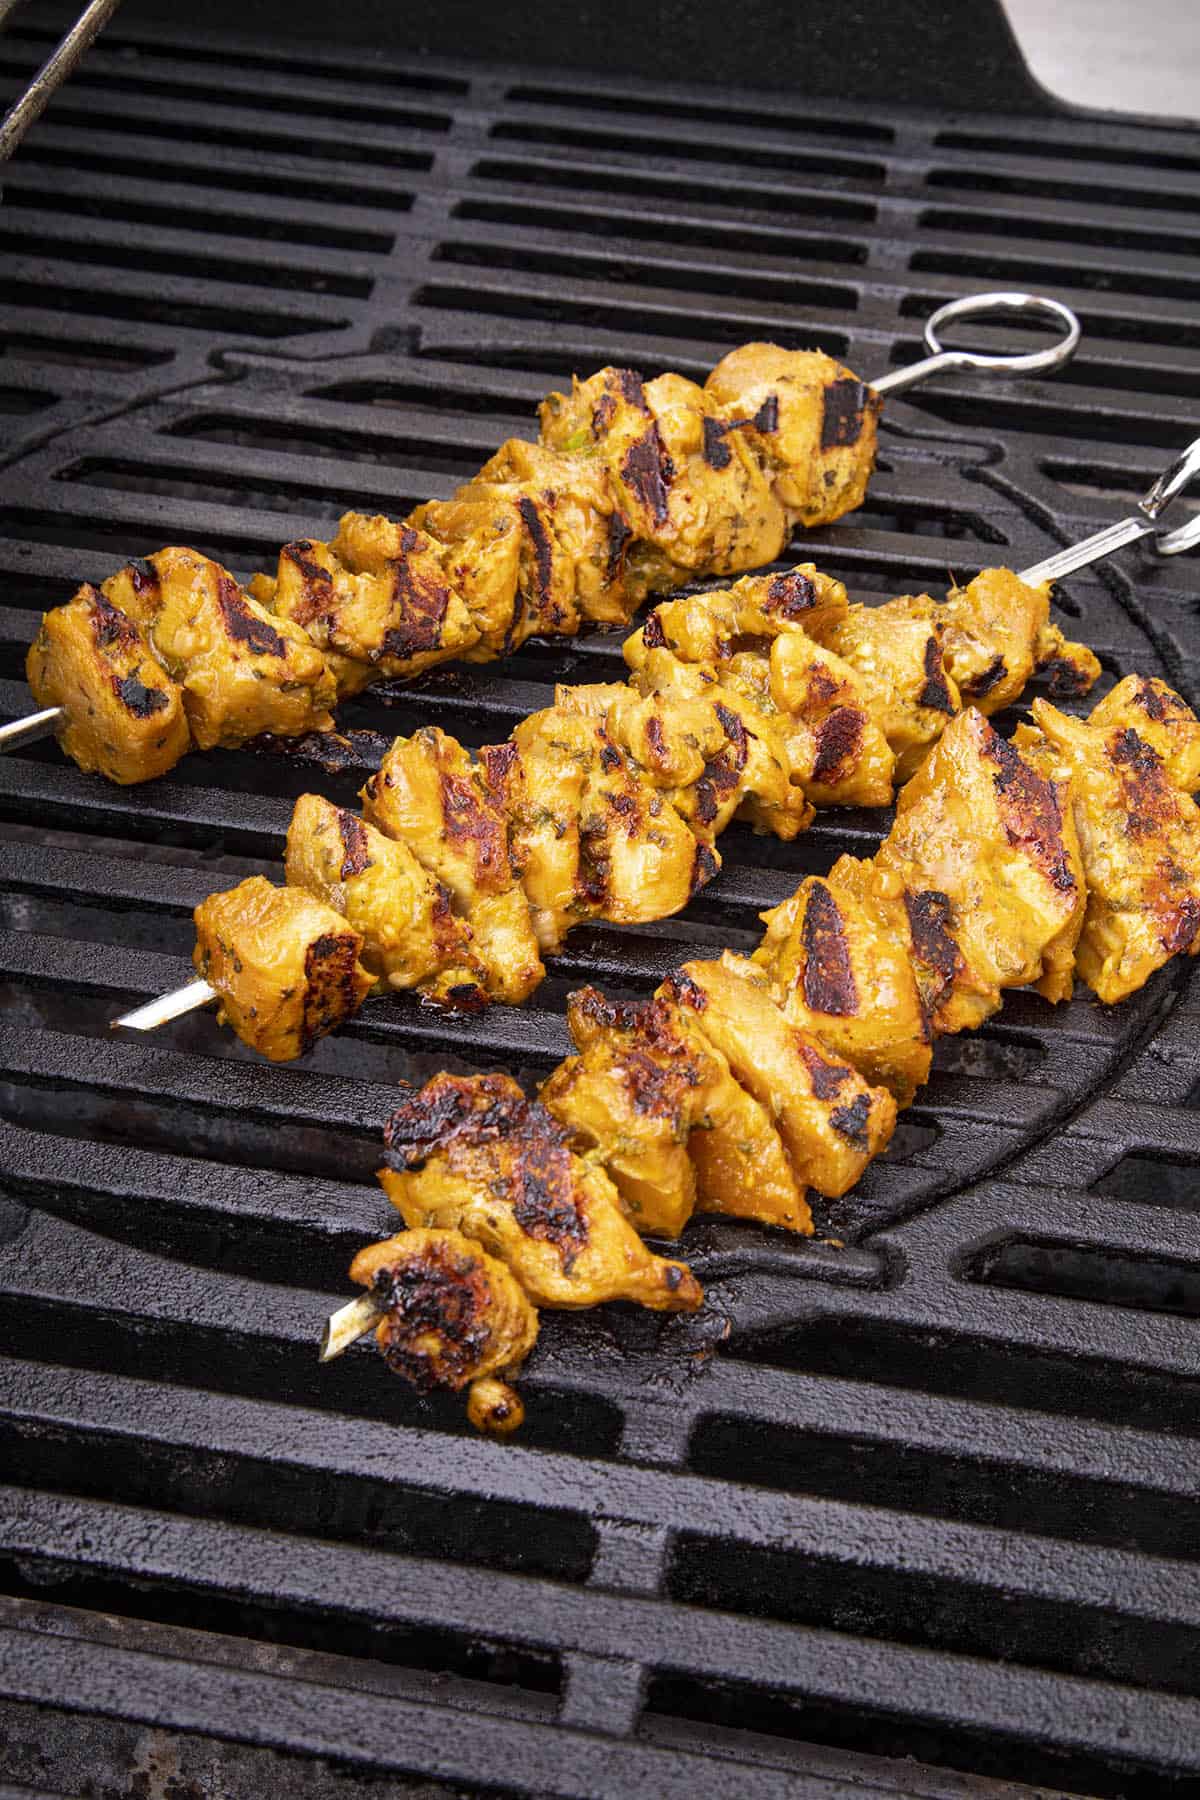 Chicken satay skewers on the grill